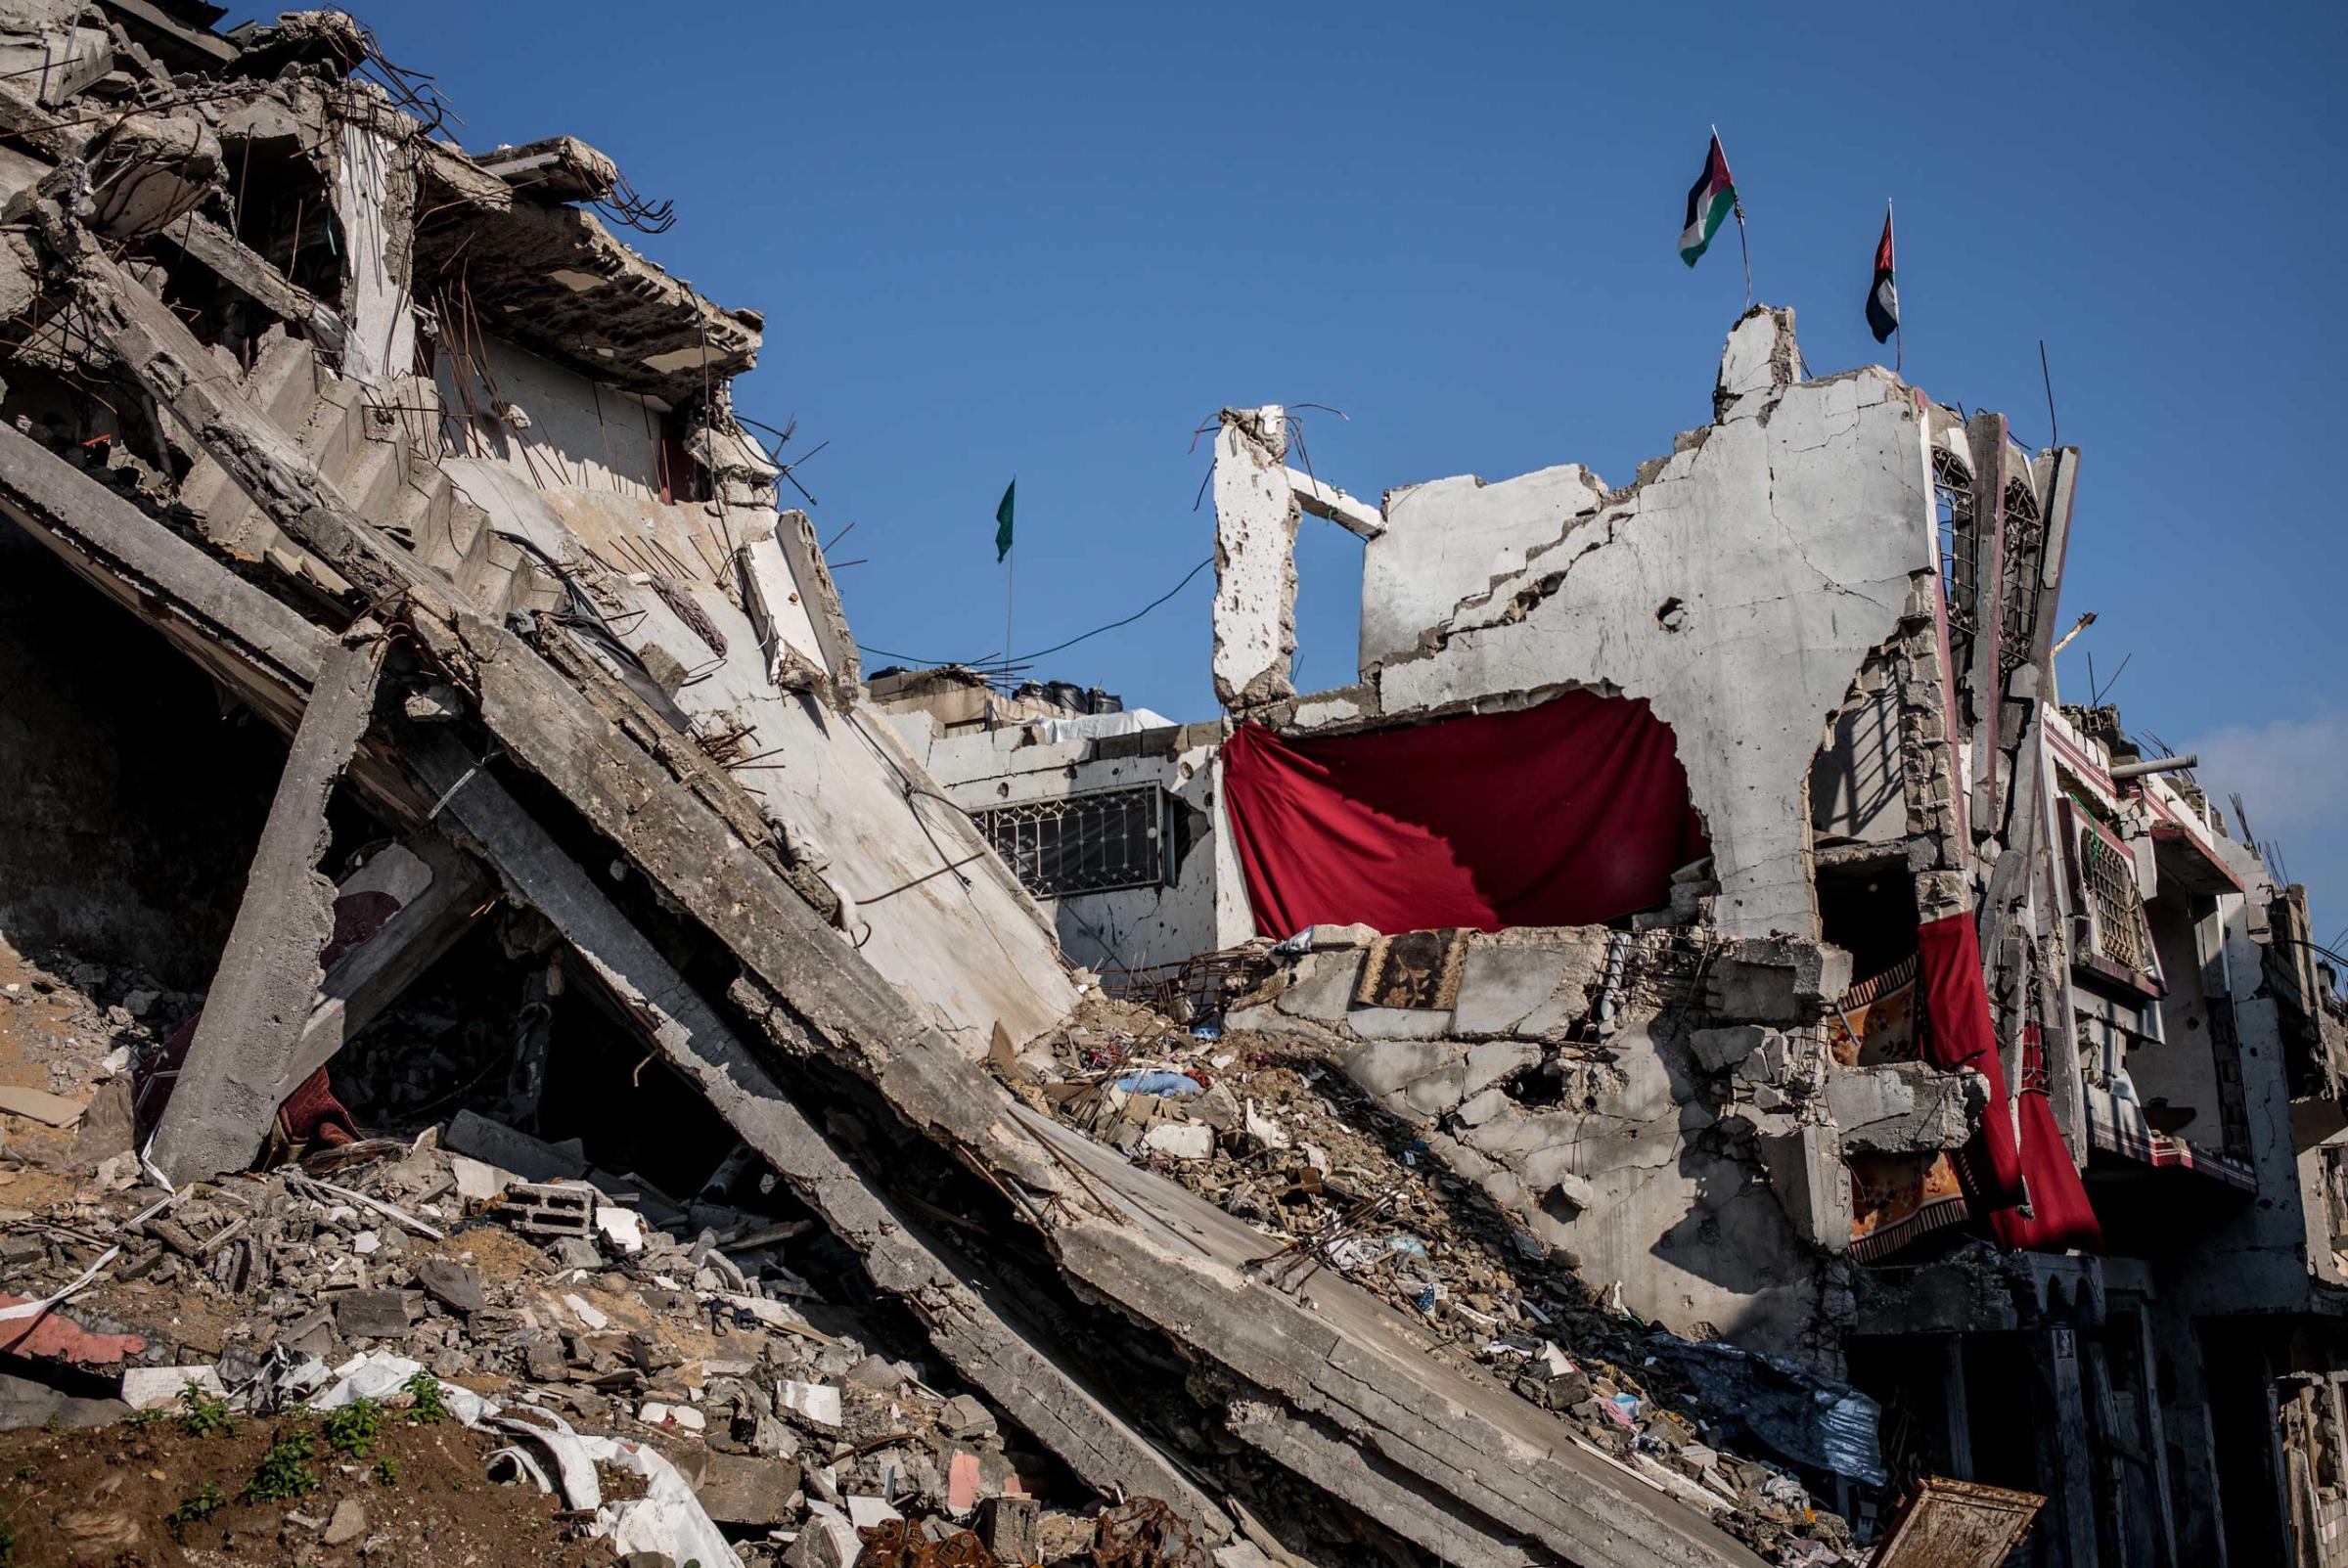 In a partially destroyed building in Shejaiya, Gaza, red blankets are used to replace the missing walls. Two Palestinian flags and a Hamas one stand on the top of the building. Gaza Strip, December 2014.